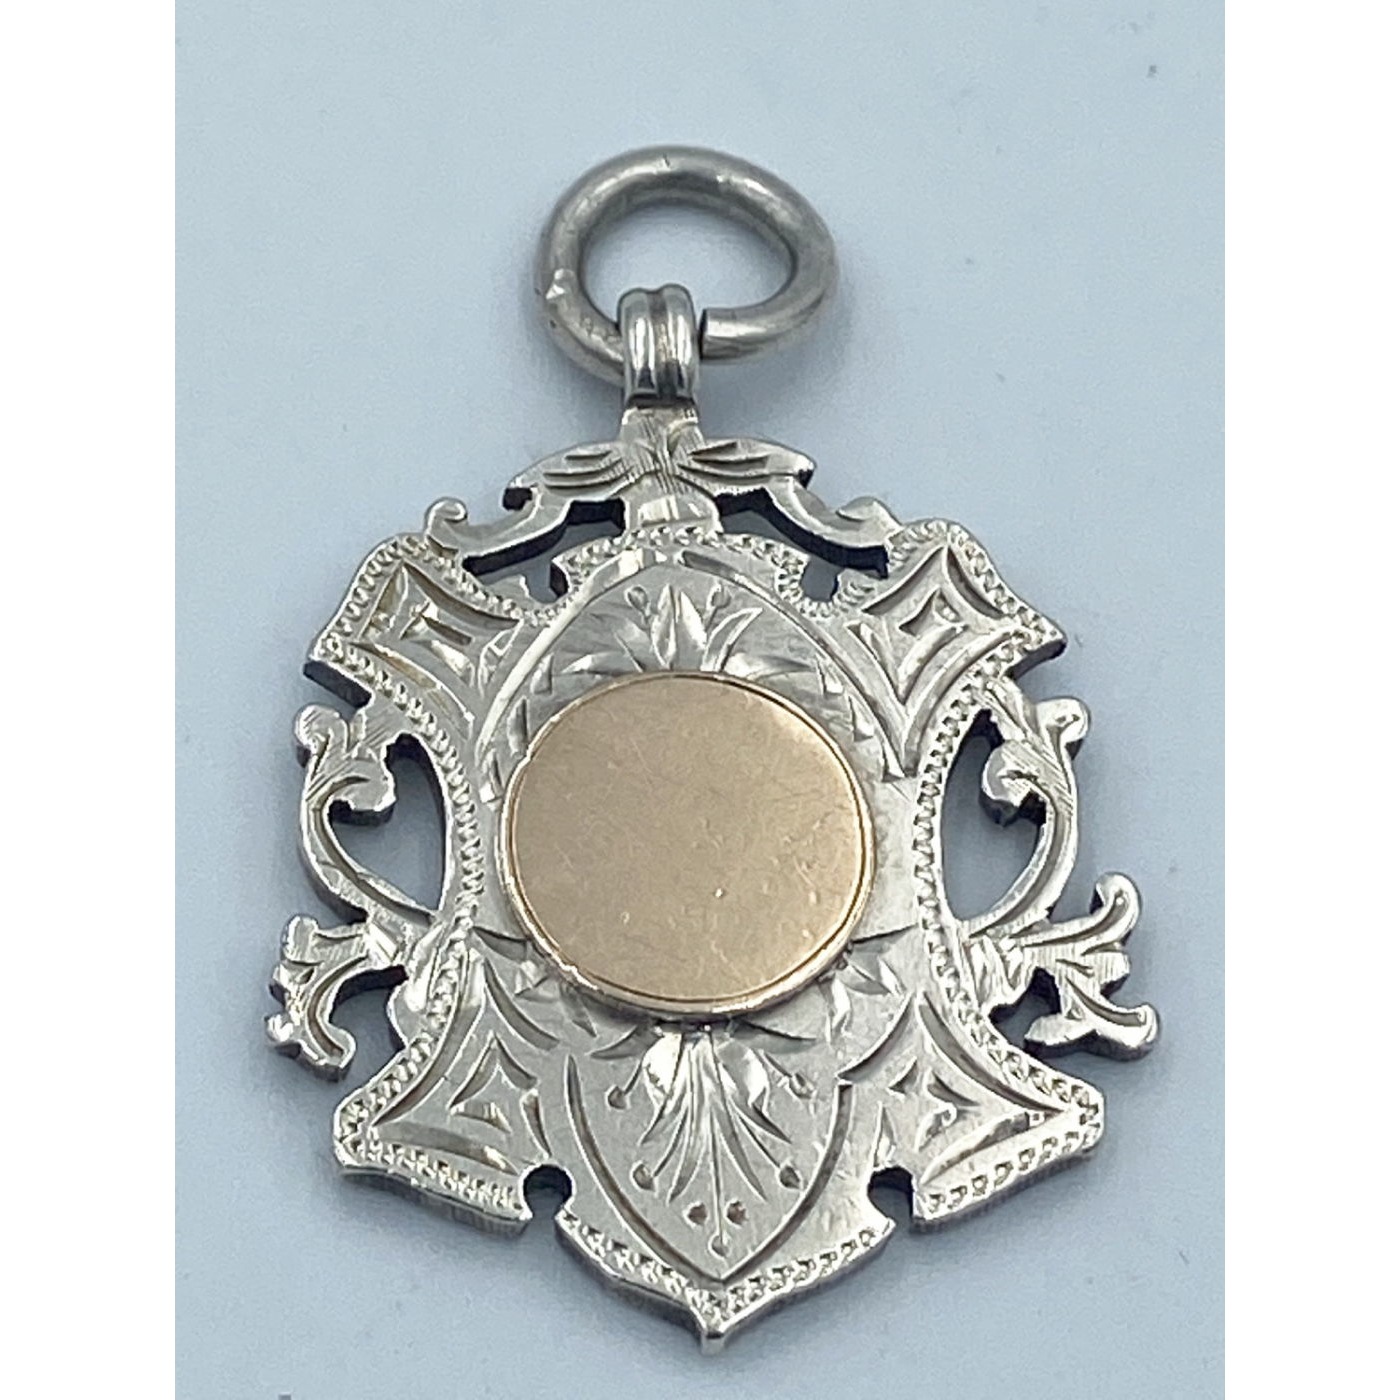 Lovely Large Ornate Silver Medal with Gold